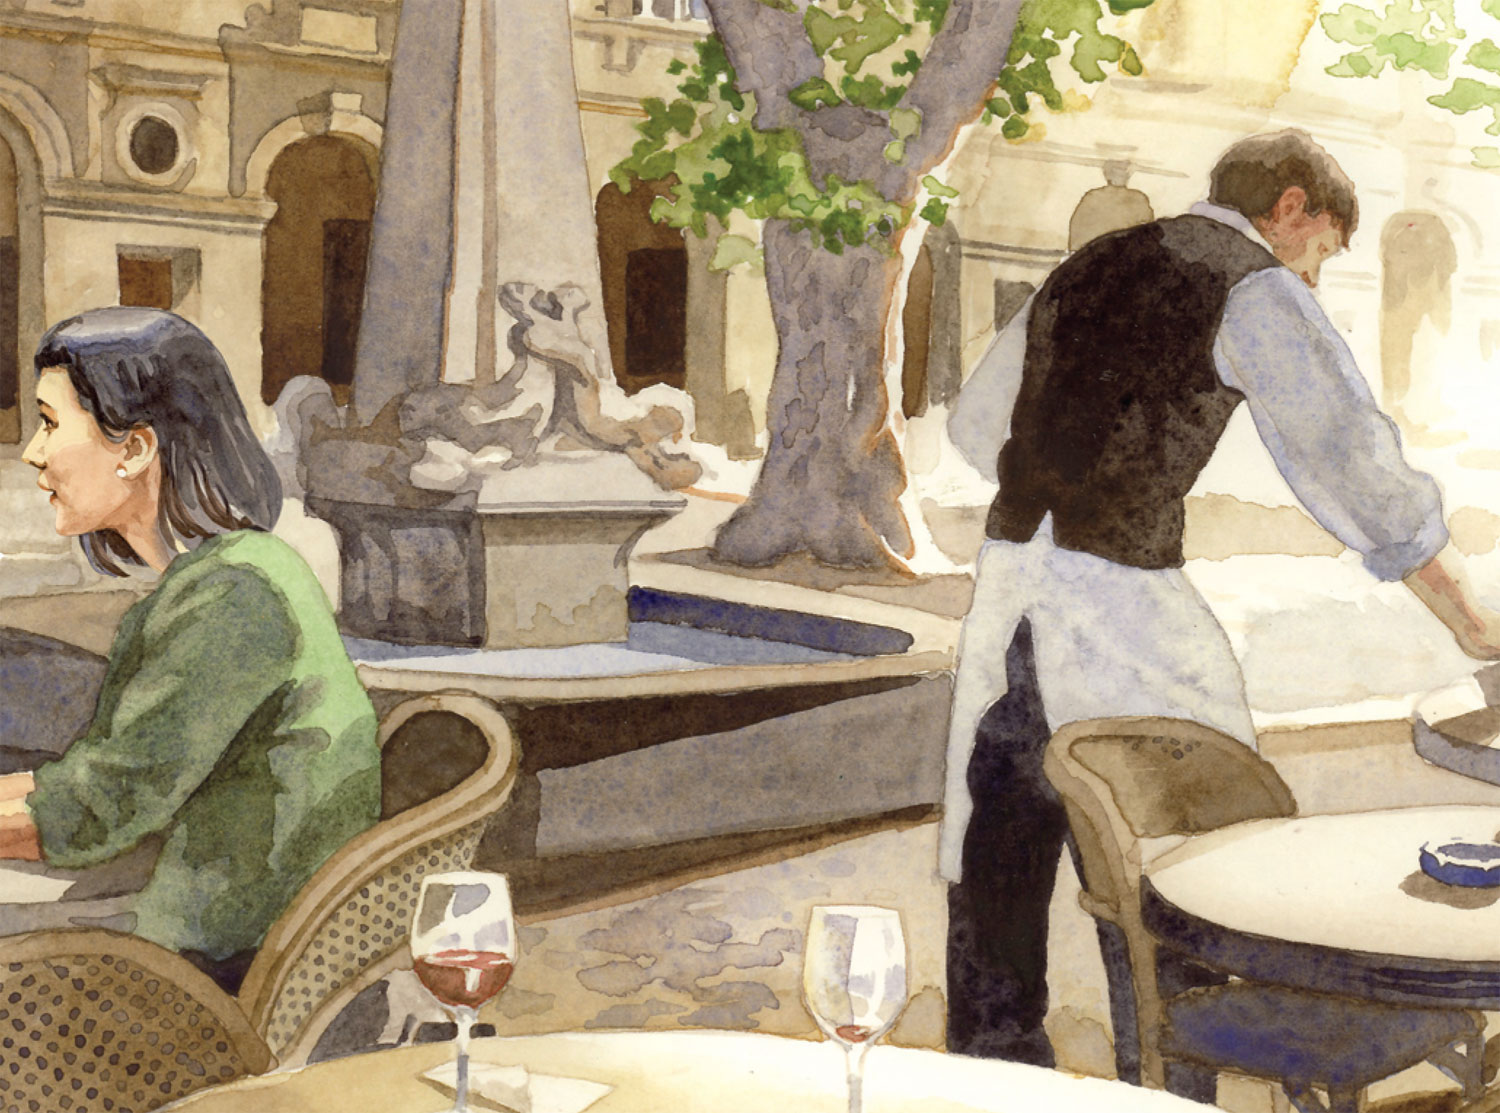 Painting of outdoor cafe by Joe McKendry 